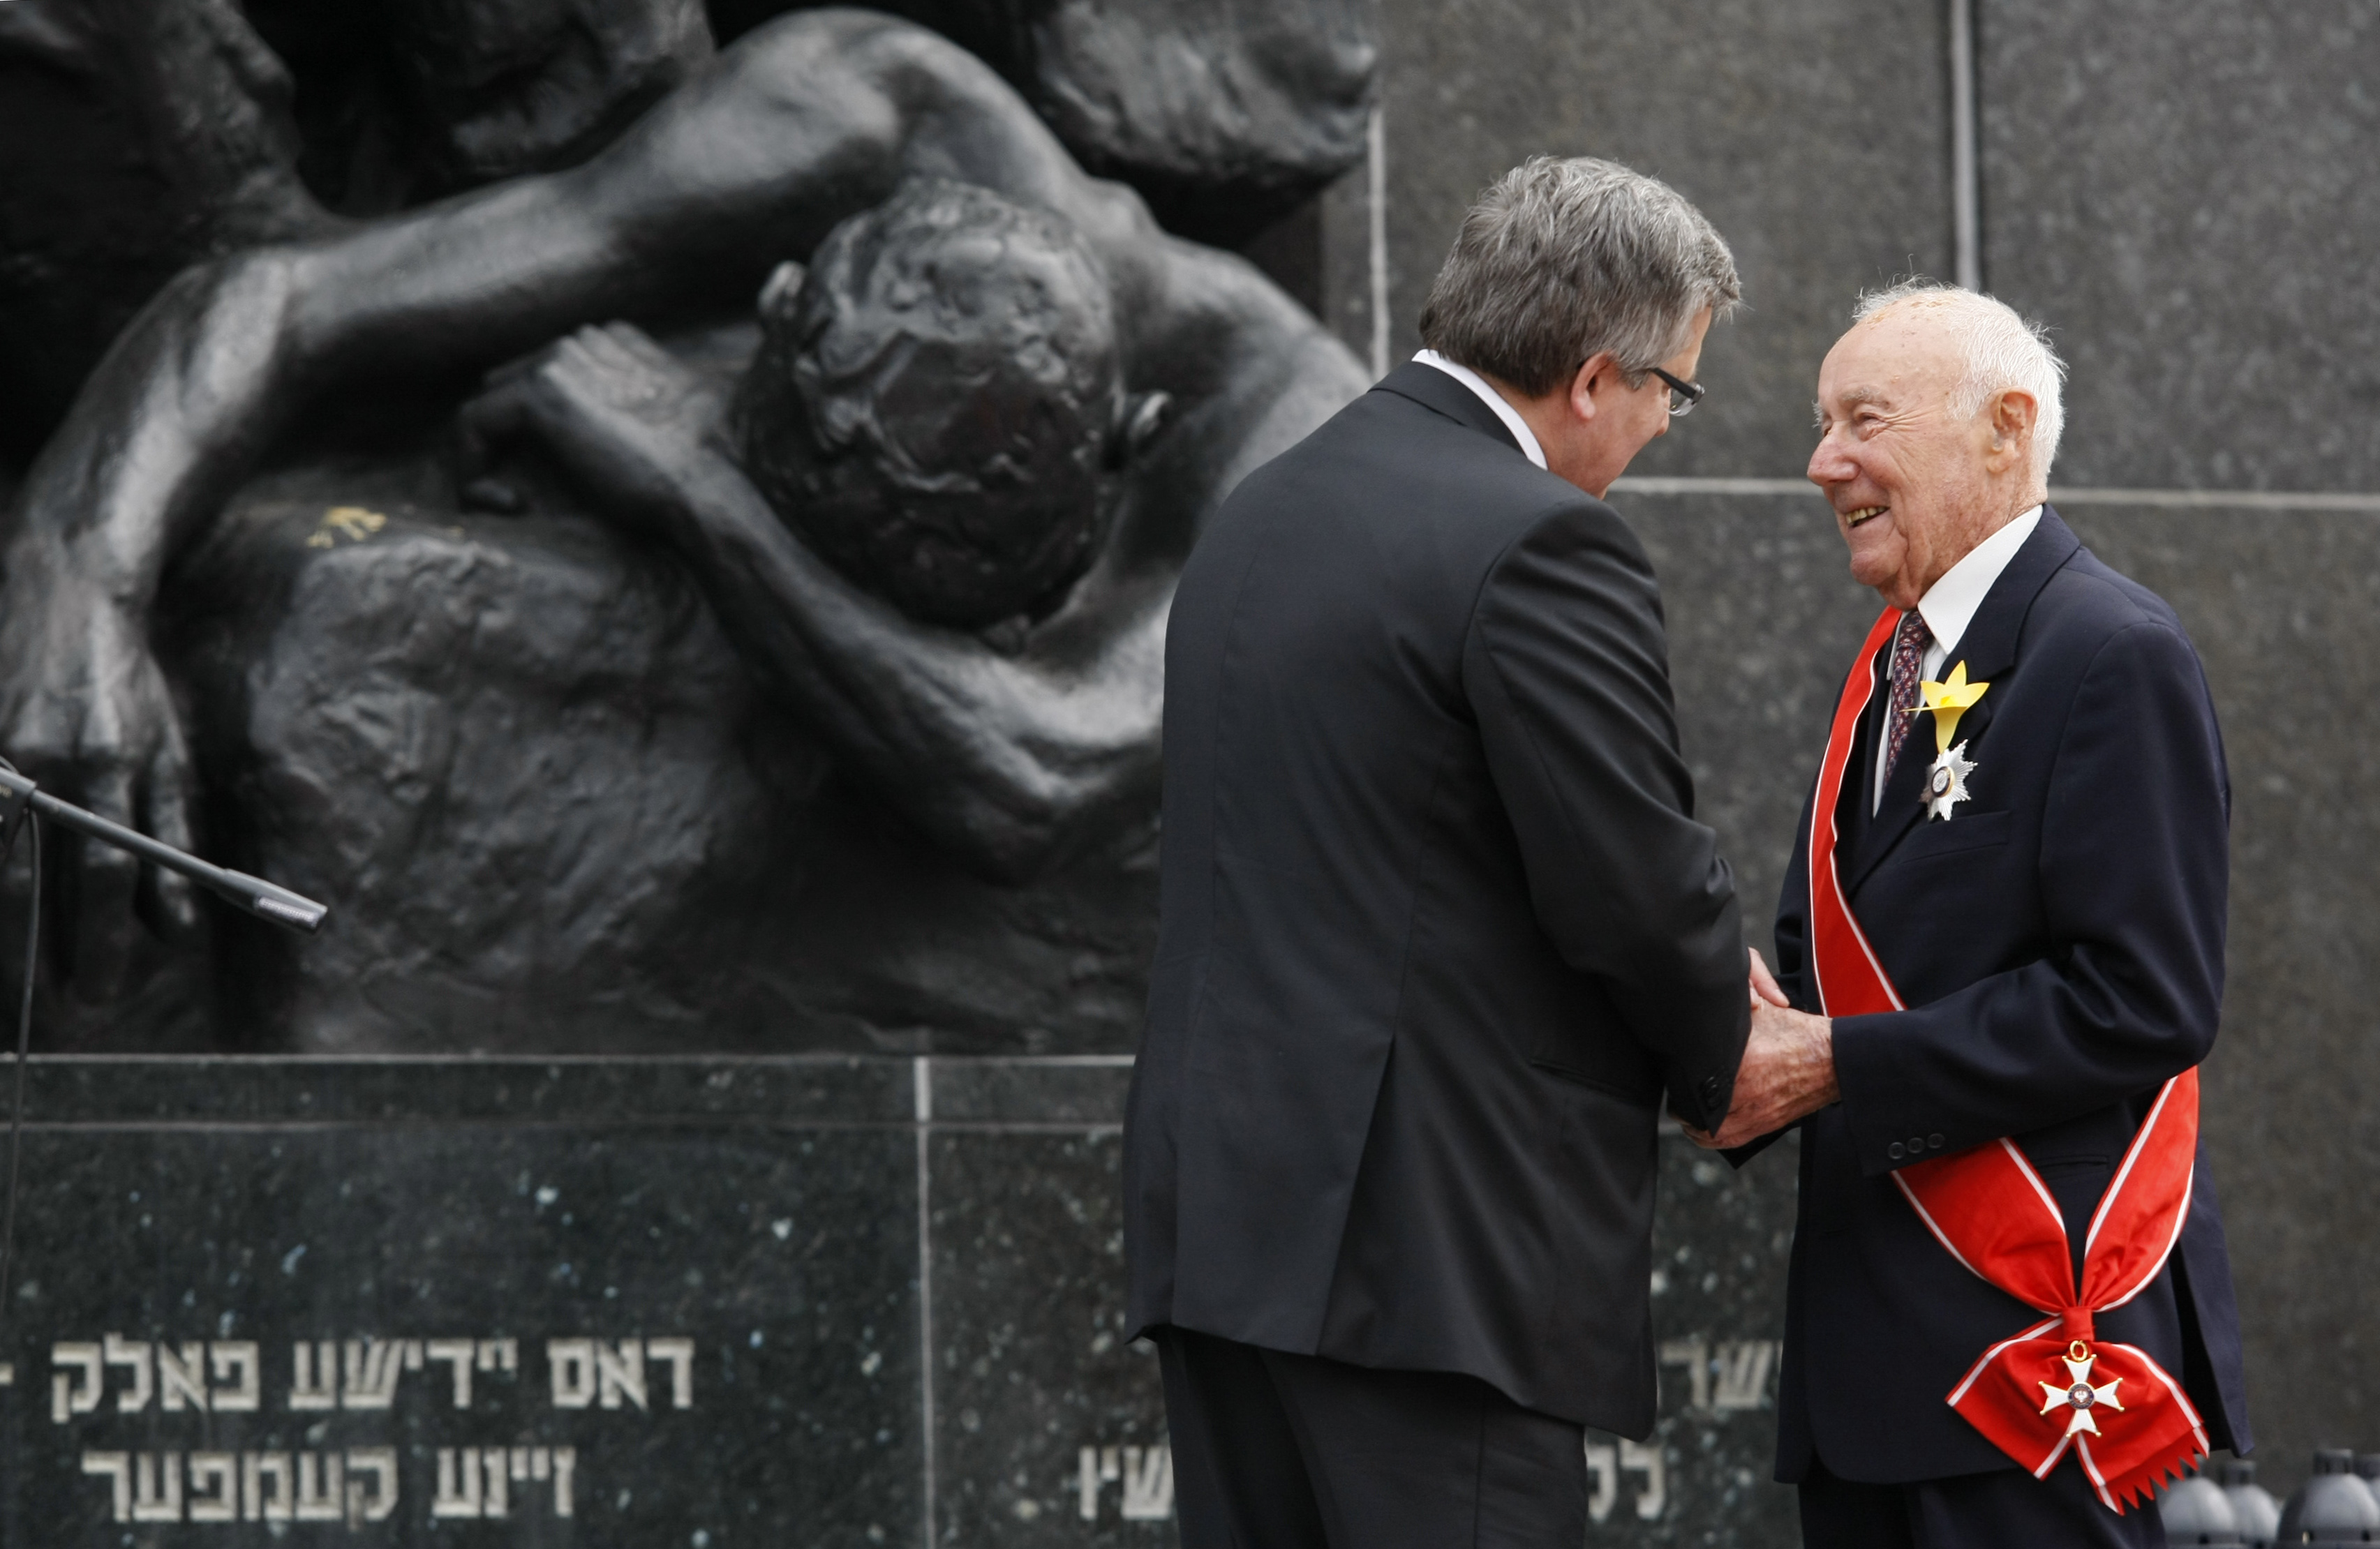 Poland's President Bronislaw Komorowski decorates Simcha Rotem, one of the last living Warsaw Ghetto insurgents, with the Grand Cross of the Order of the Rebirth of Poland during a ceremony commemorating the 70th anniversary of the Warsaw Ghetto Uprising at the Monument to the Ghetto Heroes, in Warsaw April 19, 2013. REUTERS/Kacper Pempel 